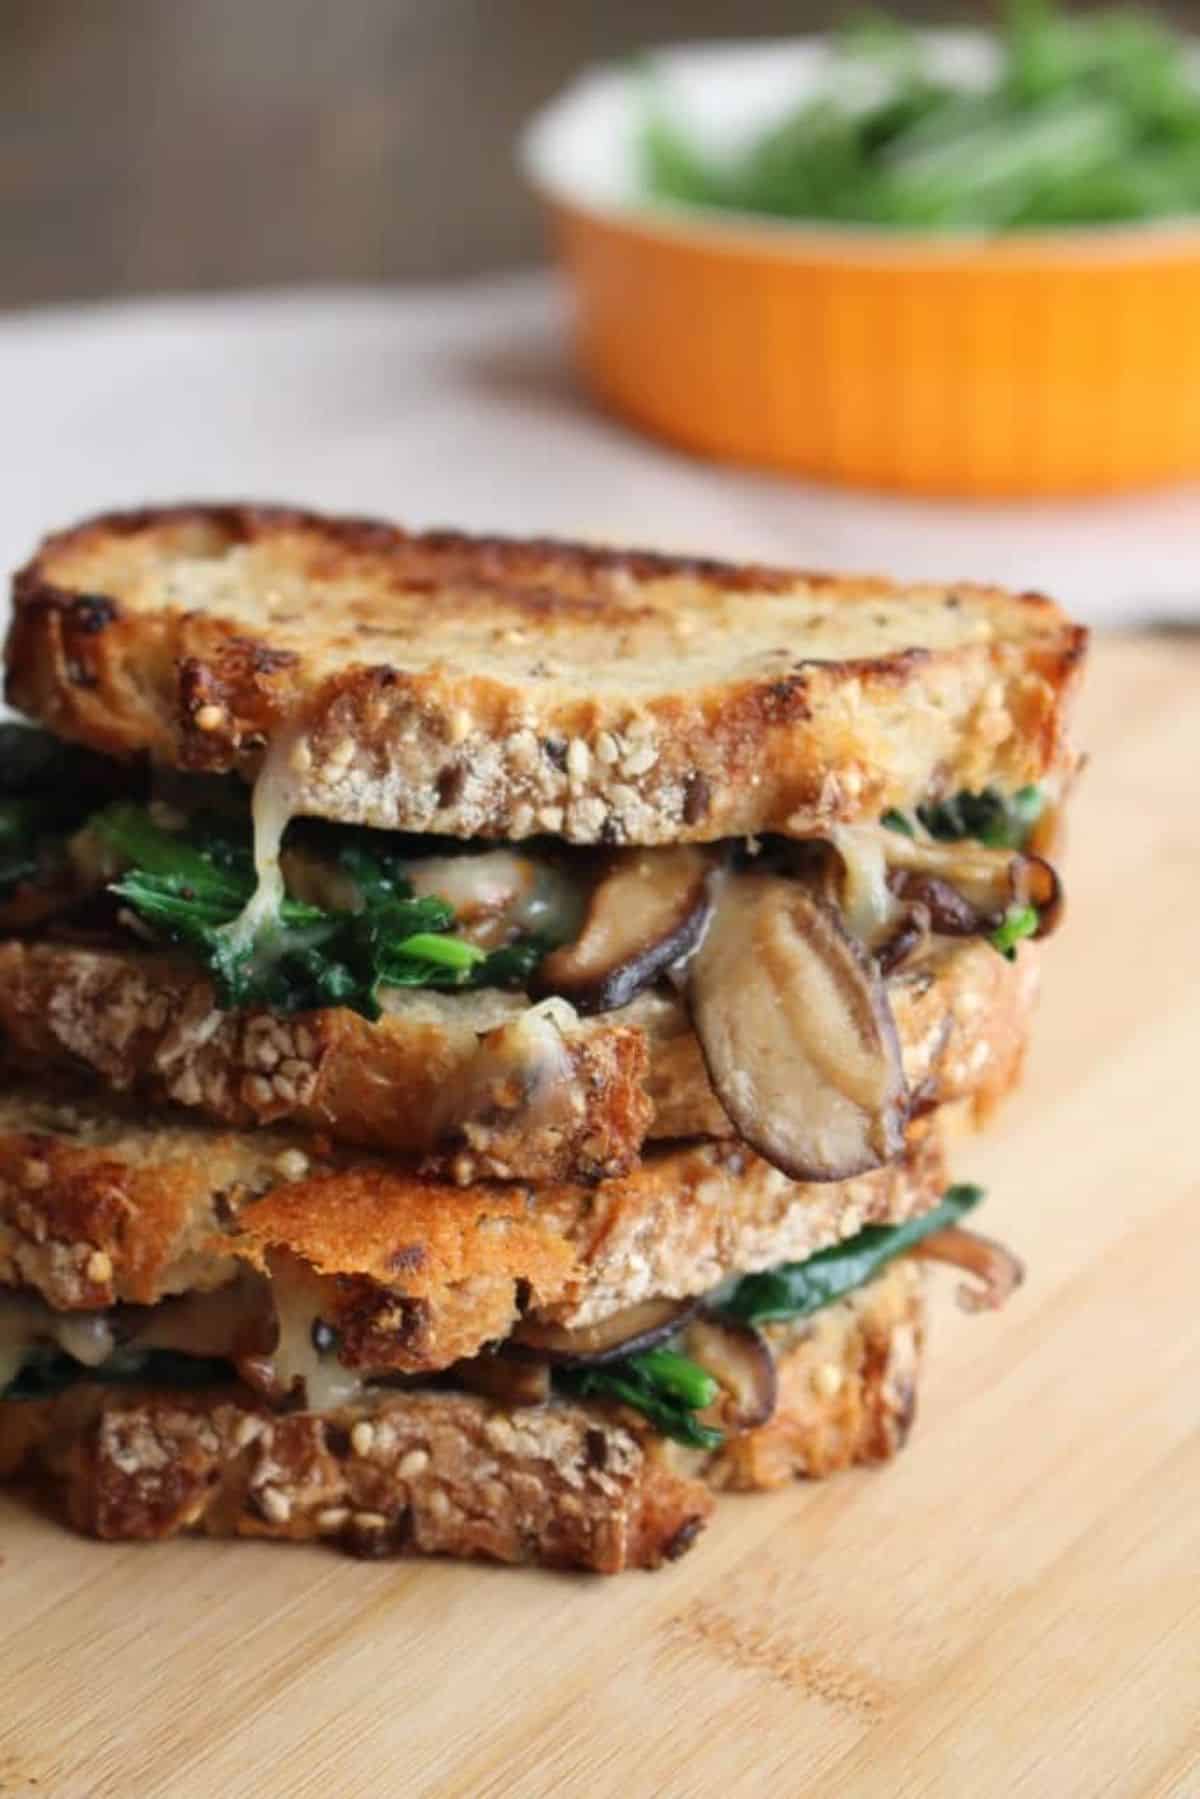 A pile of mouth-watering mushroom grilled cheese melts on a wooden tray.